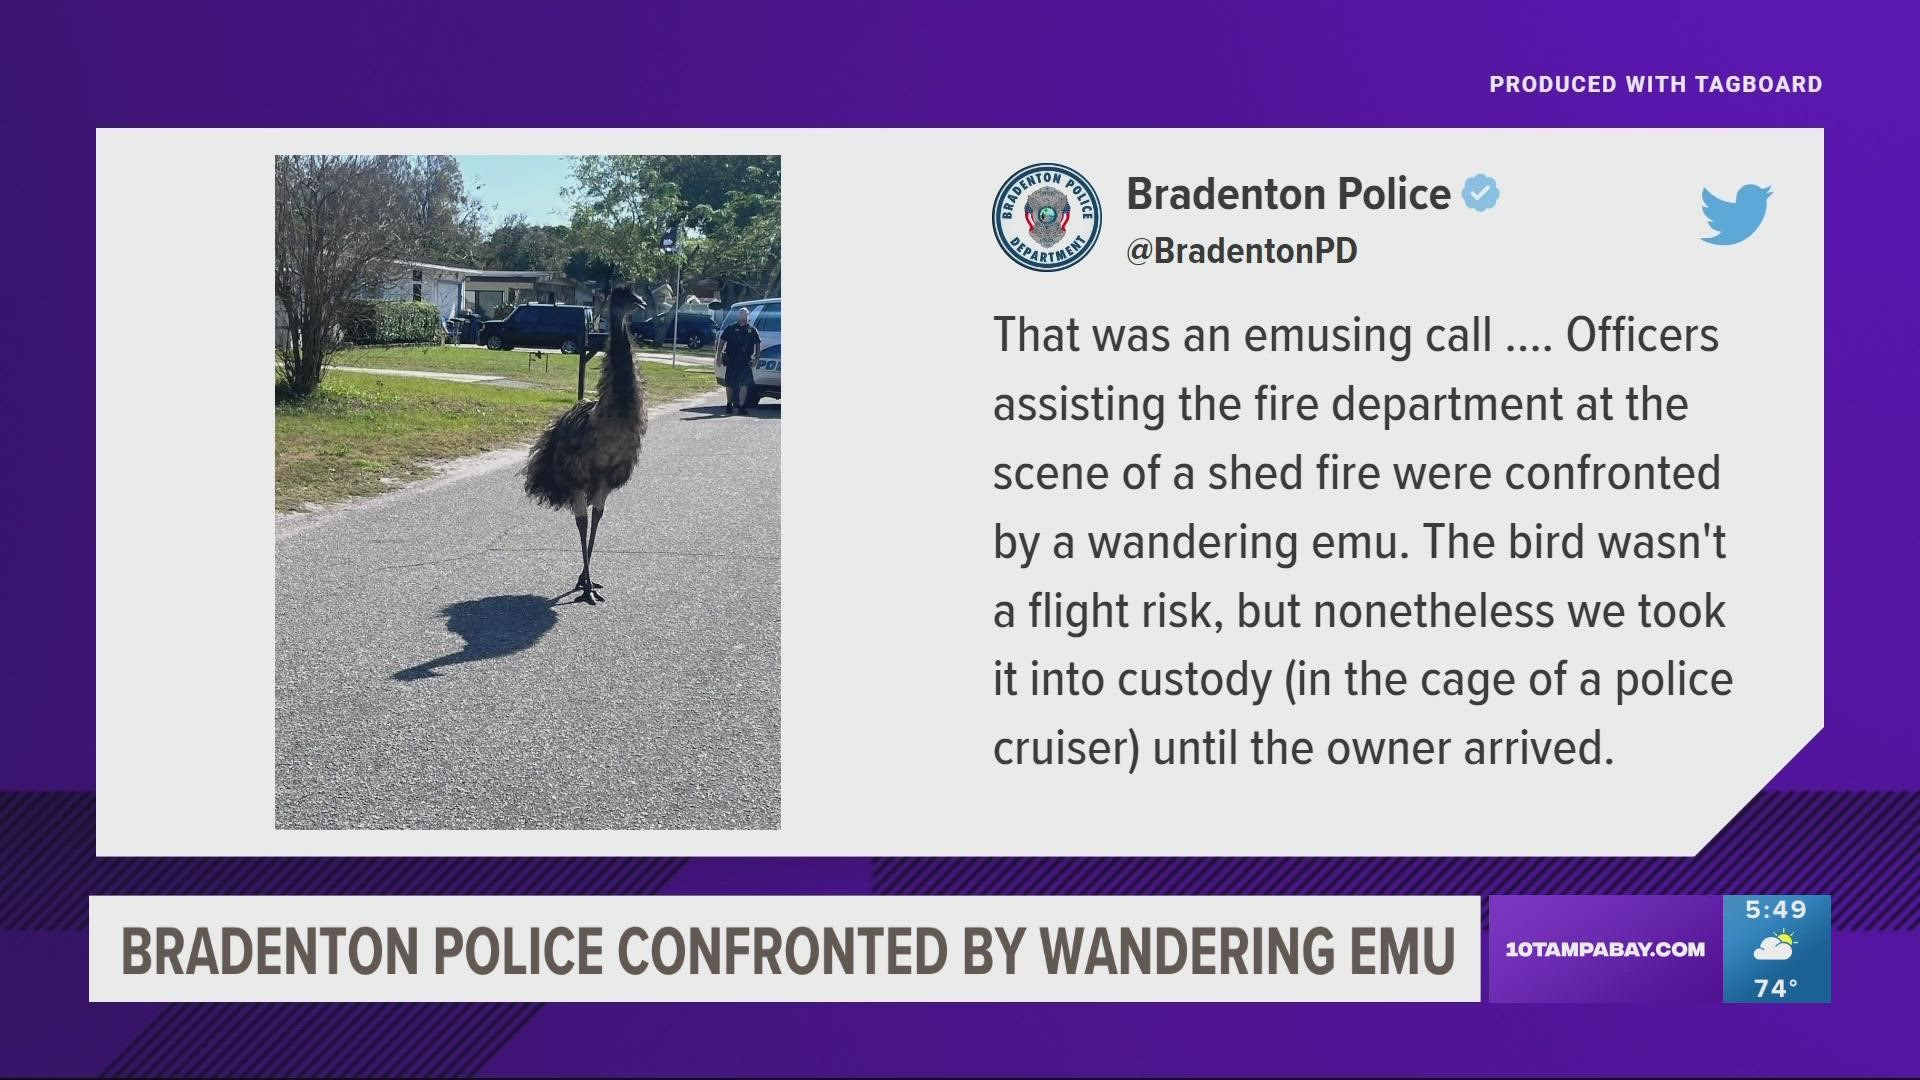 Police were confronted by the flightless bird while assisting with a shed fire.